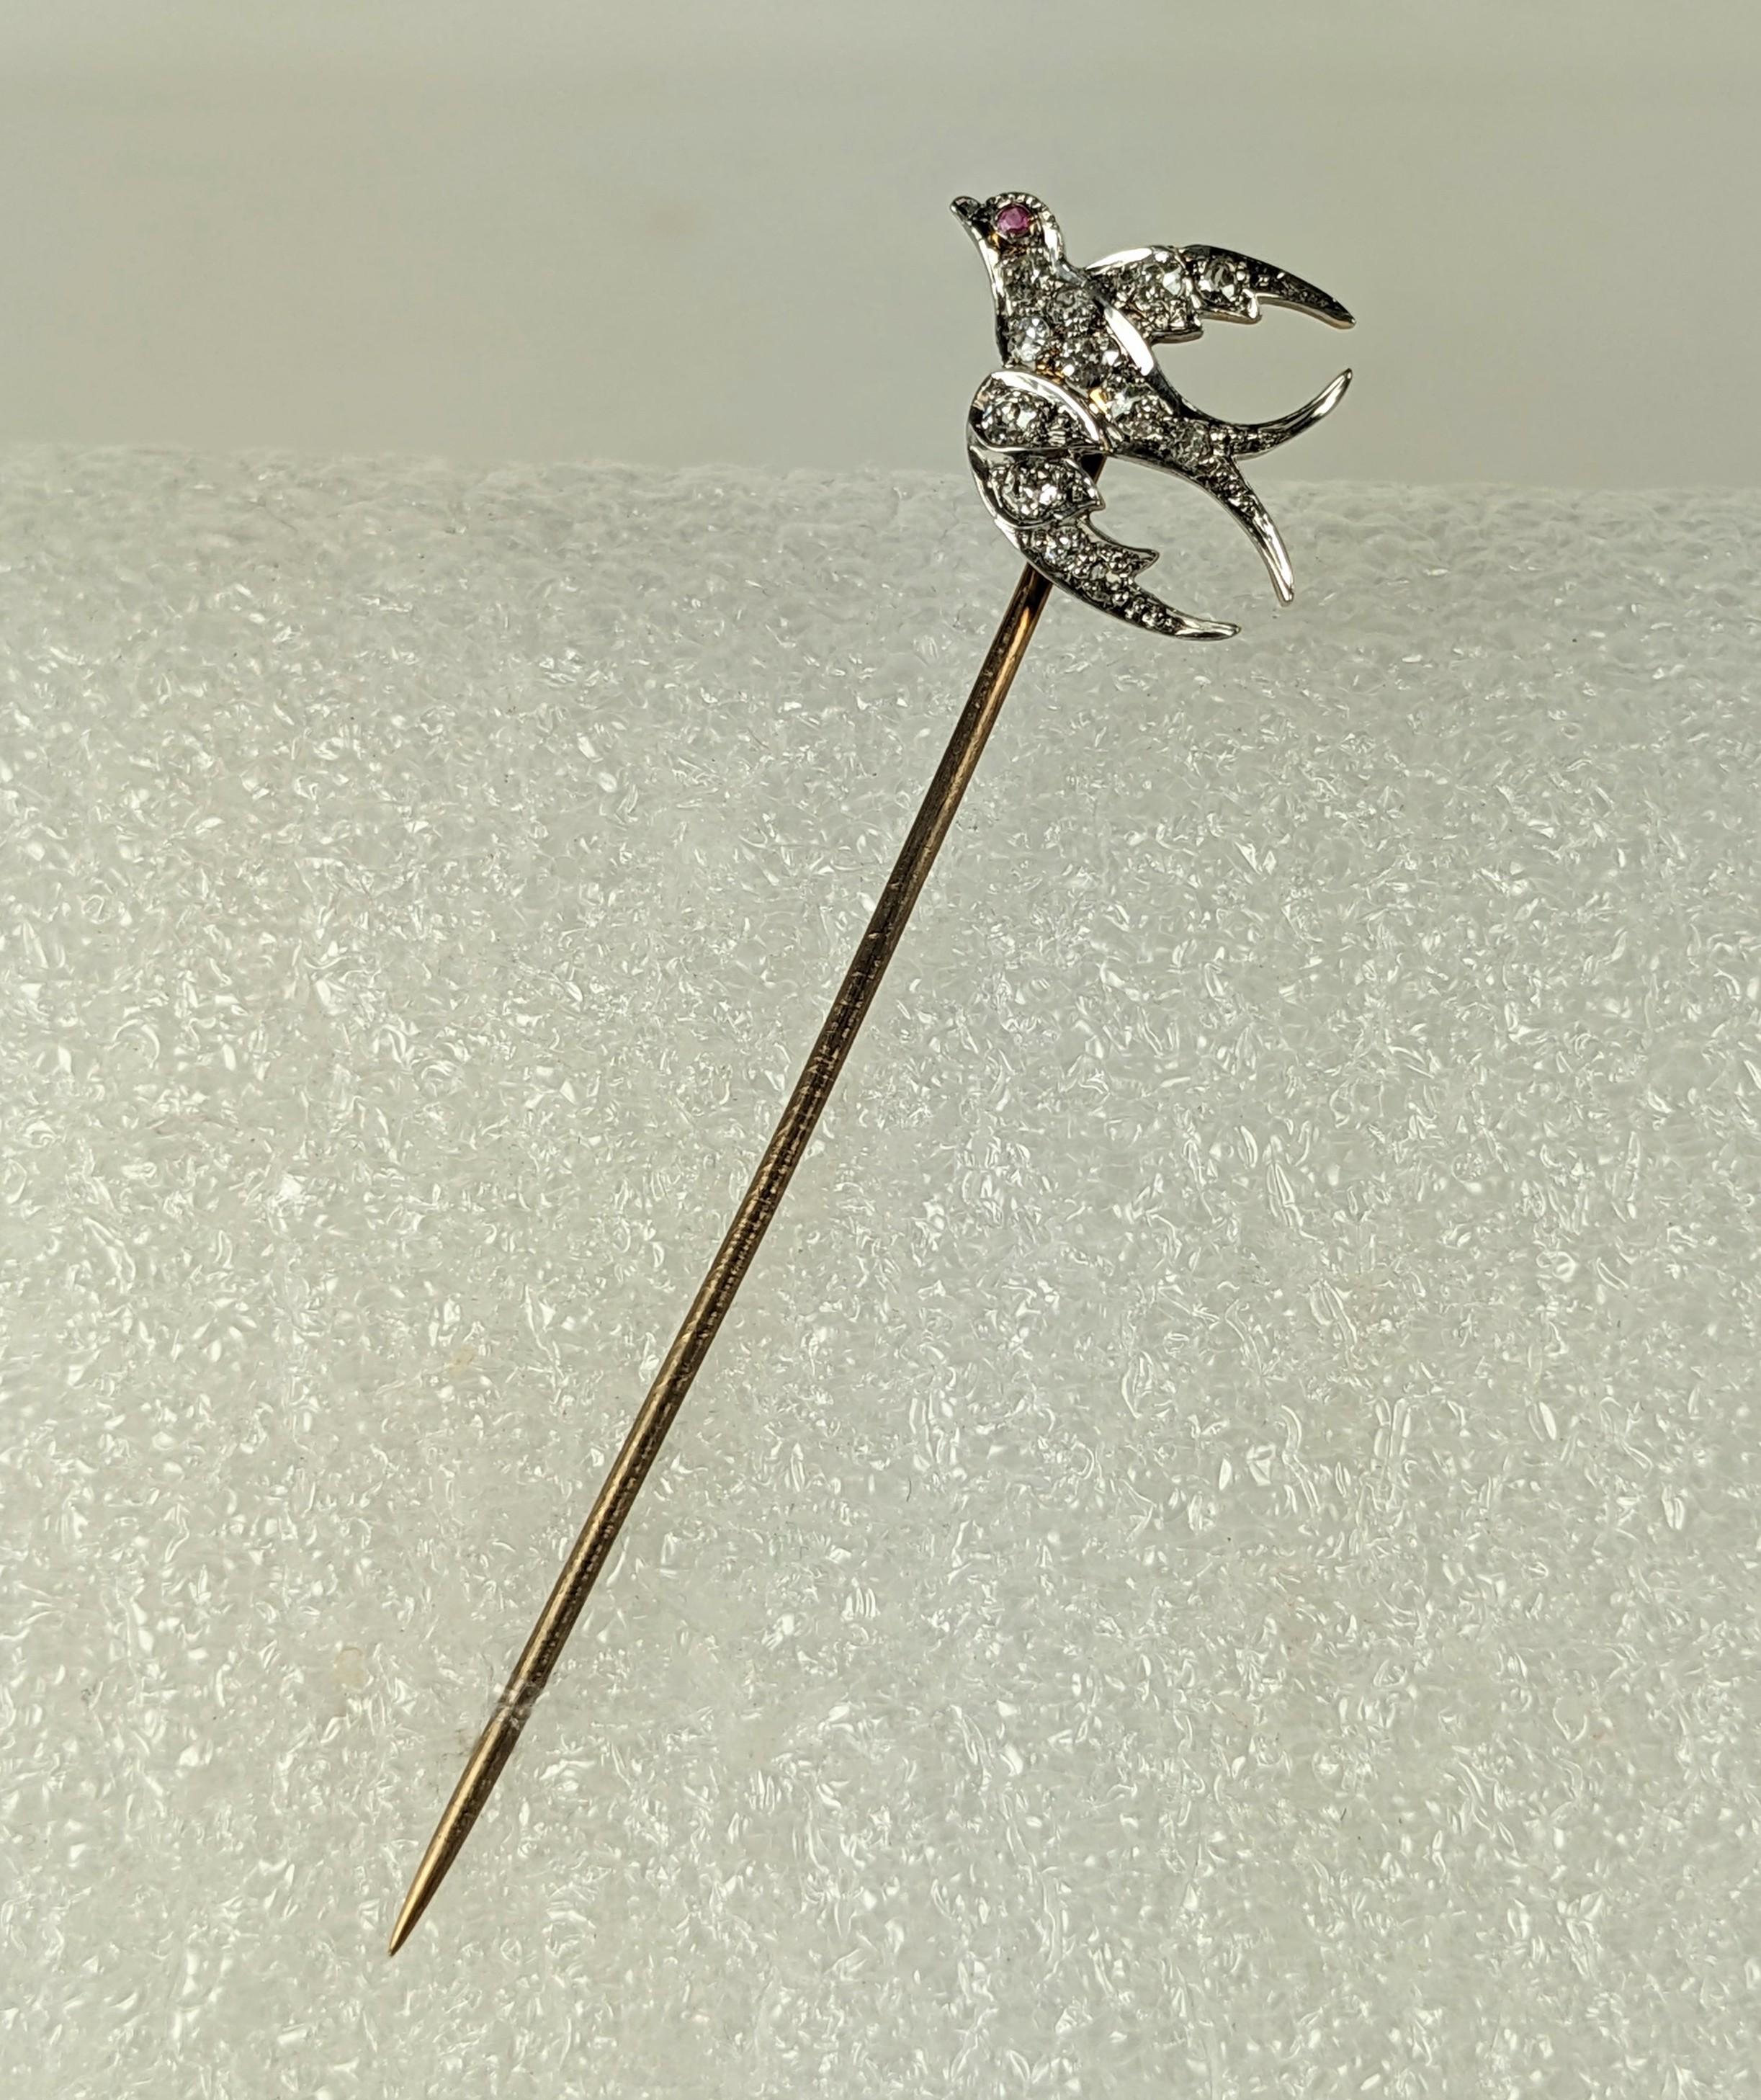 Lovely Victorian Diamond Dove or Sparrow Stickpin in 18K with bright European cut diamonds with tiny ruby eye. Platinum topped gold, beautifully crafted. 2.75